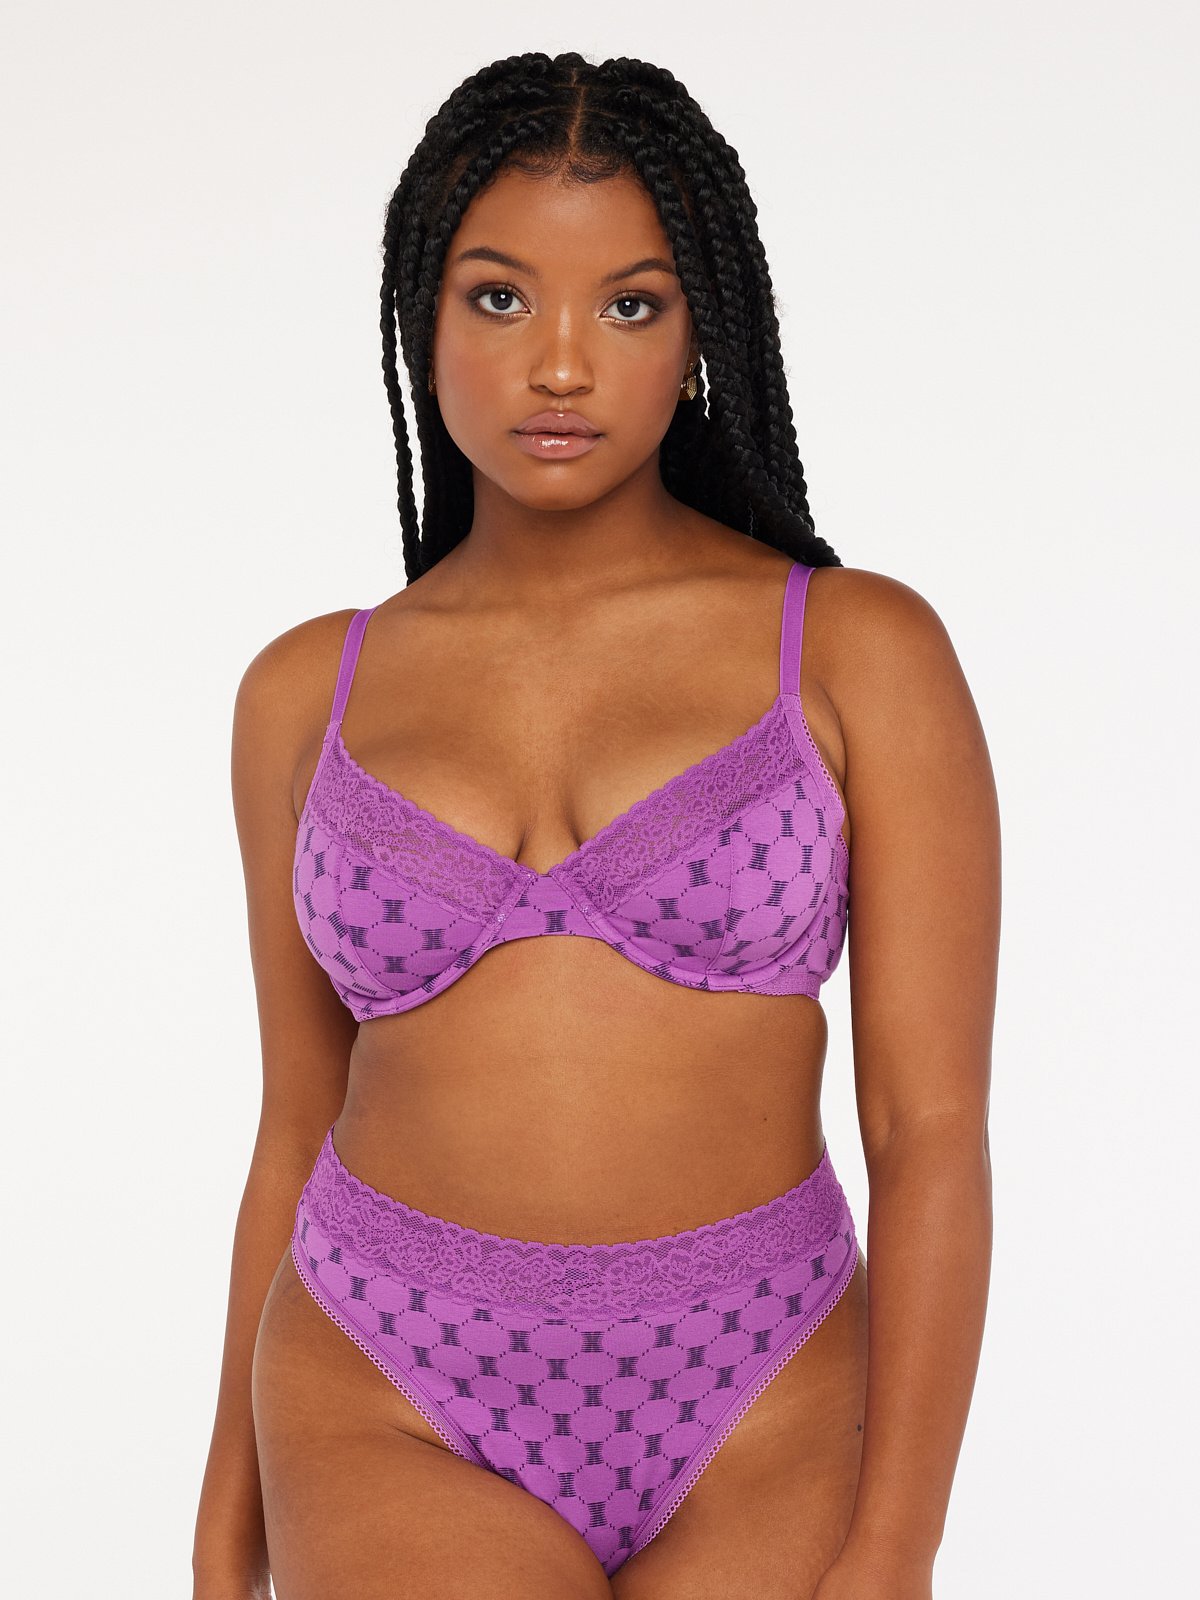 Cacique Purple Cotton Blend Lightly Lined Full Coverage Bra Women's Size 46D  - $27 - From Taylor